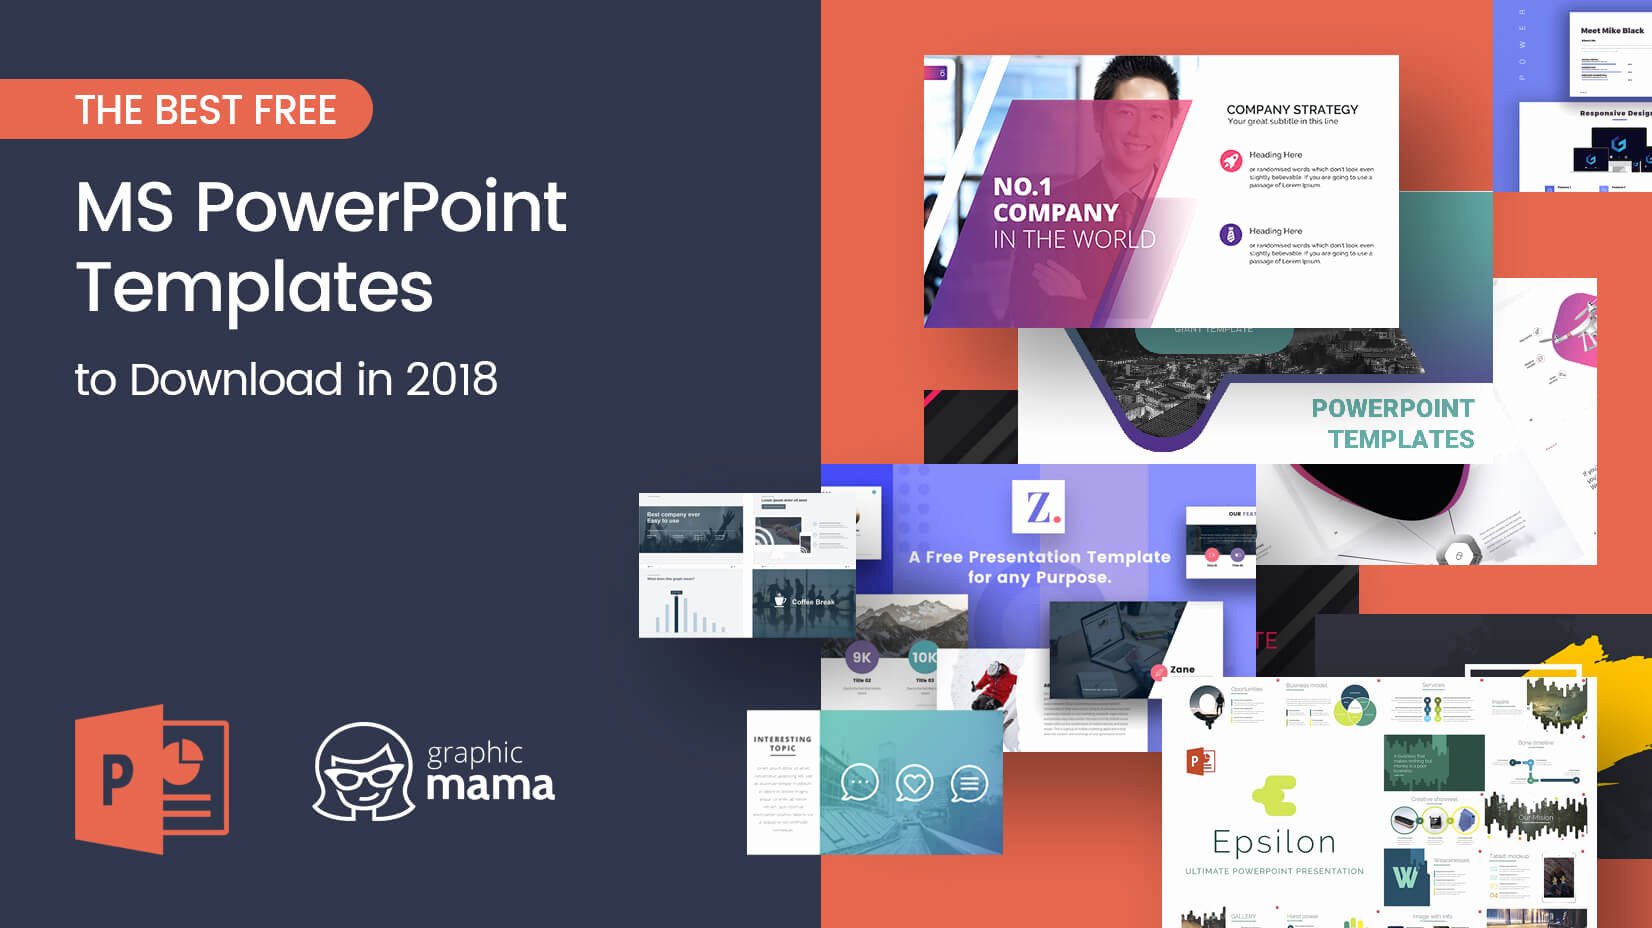 The Best Free Powerpoint Templates to Download In 2018